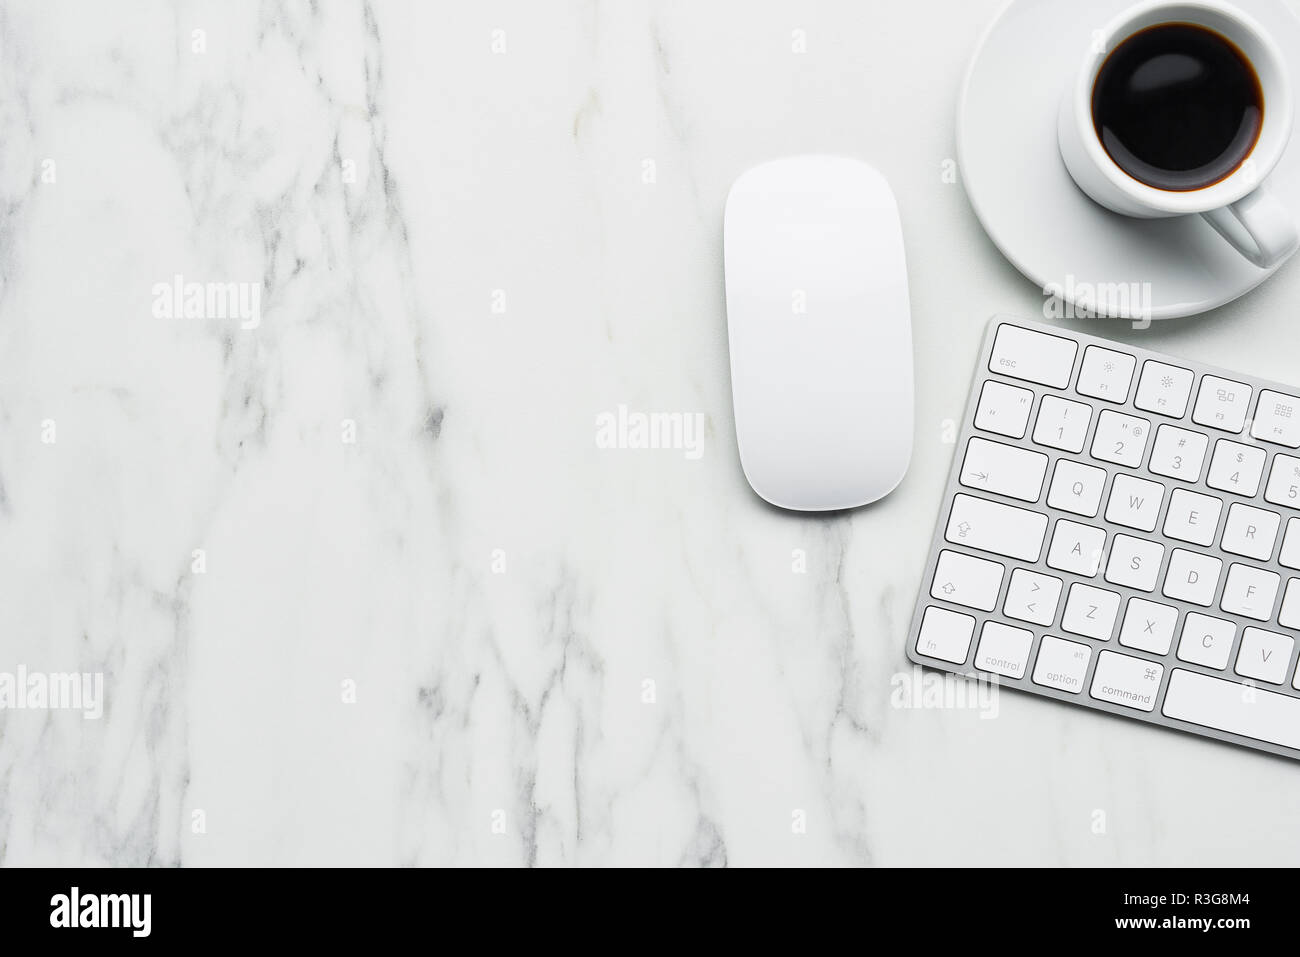 Business composition with white computer keyboard, mouse and coffee cup on white marble background. Coffee break concept. Top view with copy space for Stock Photo